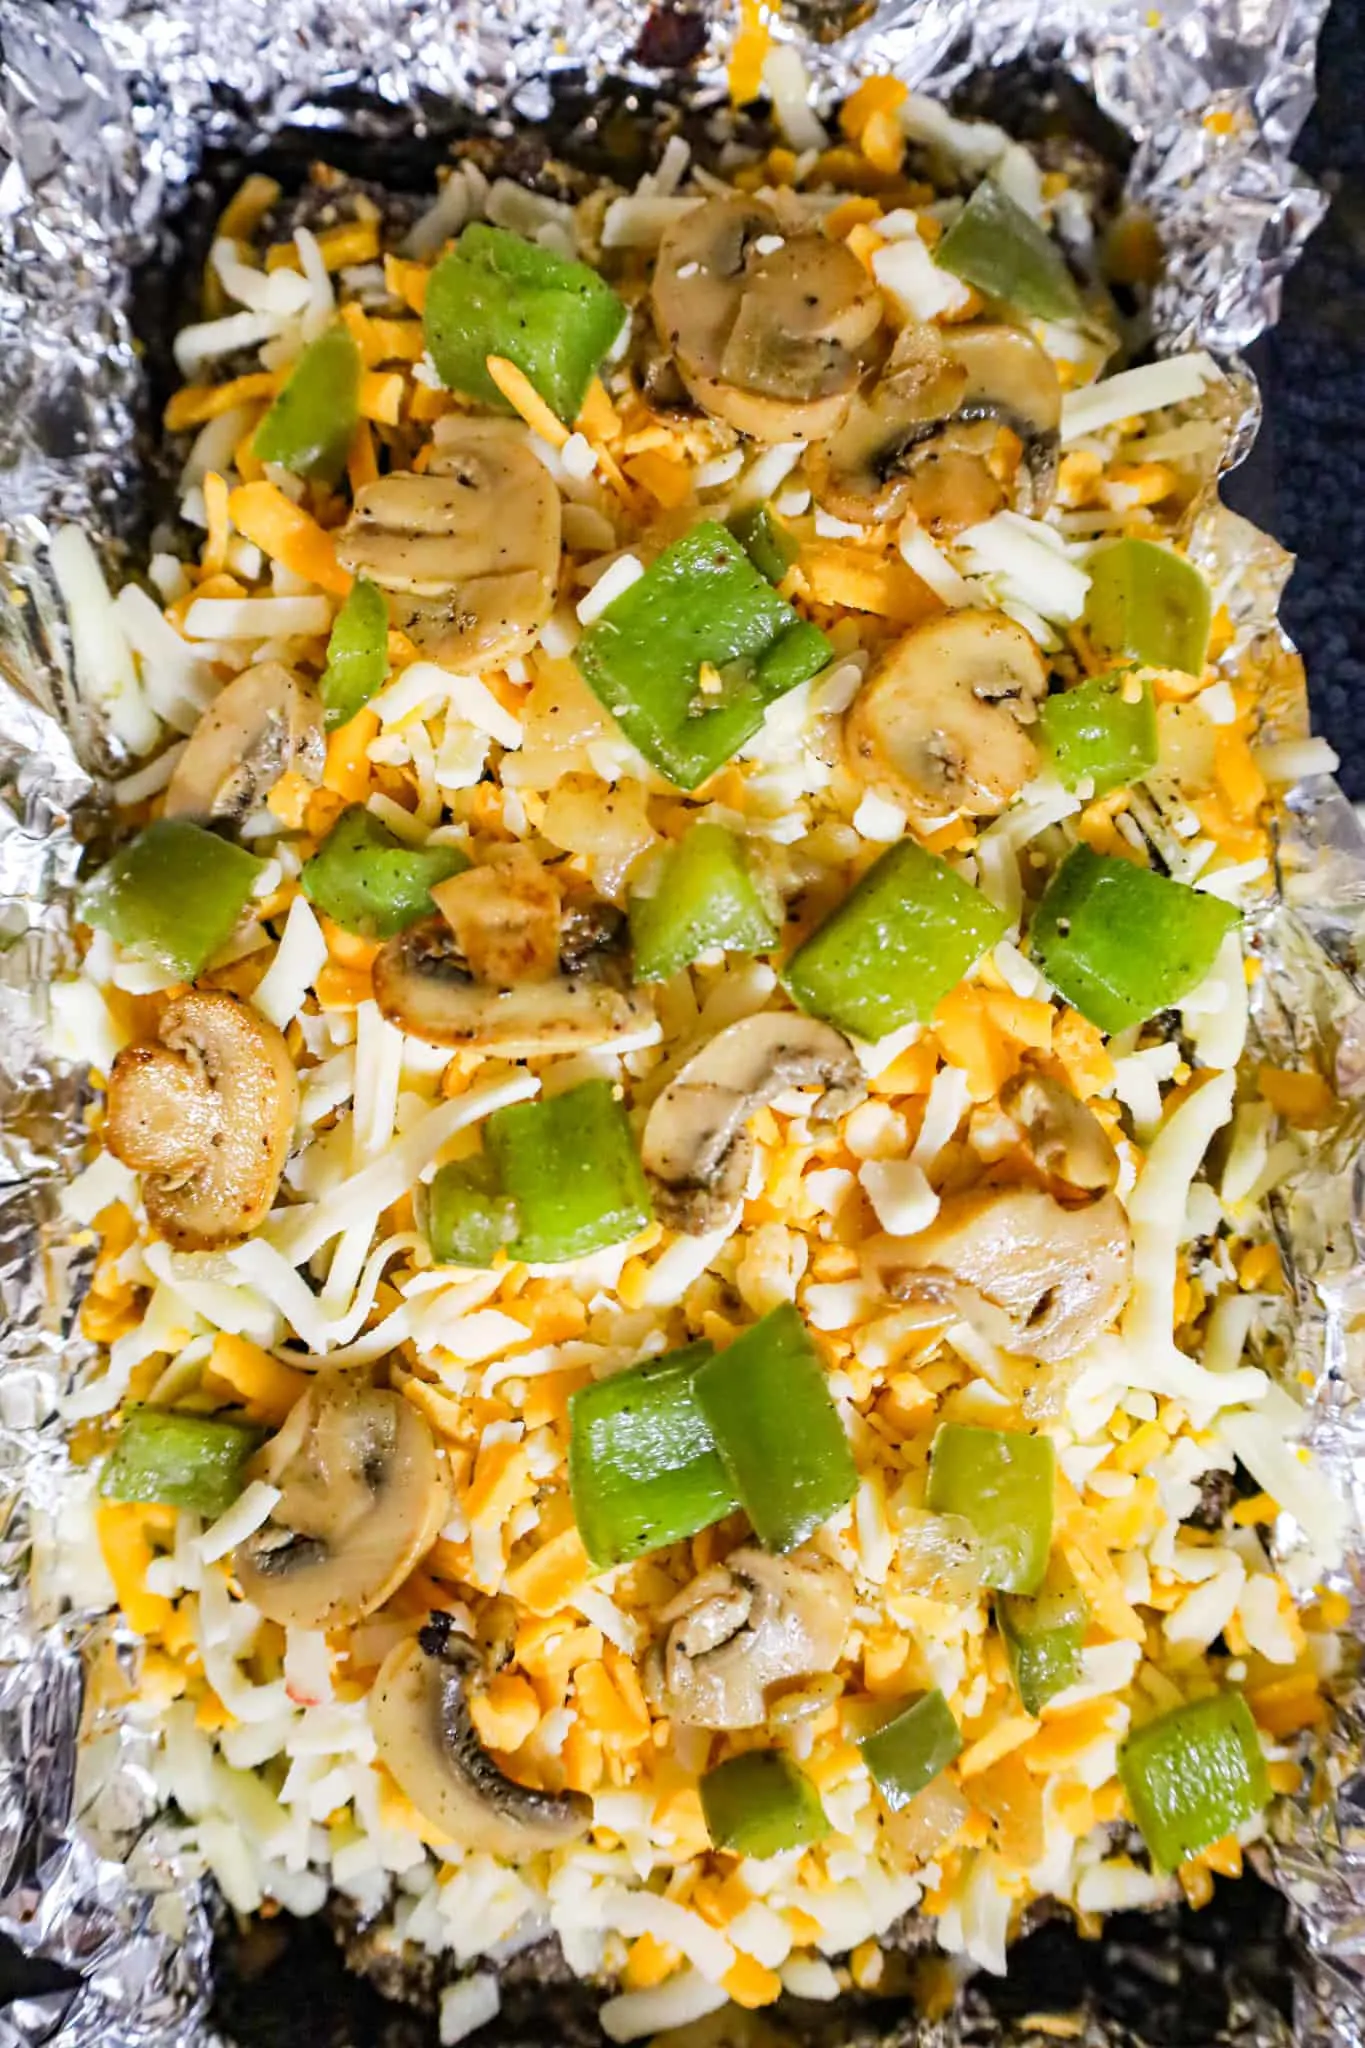 diced green peppers and sliced mushrooms on top of shredded cheese